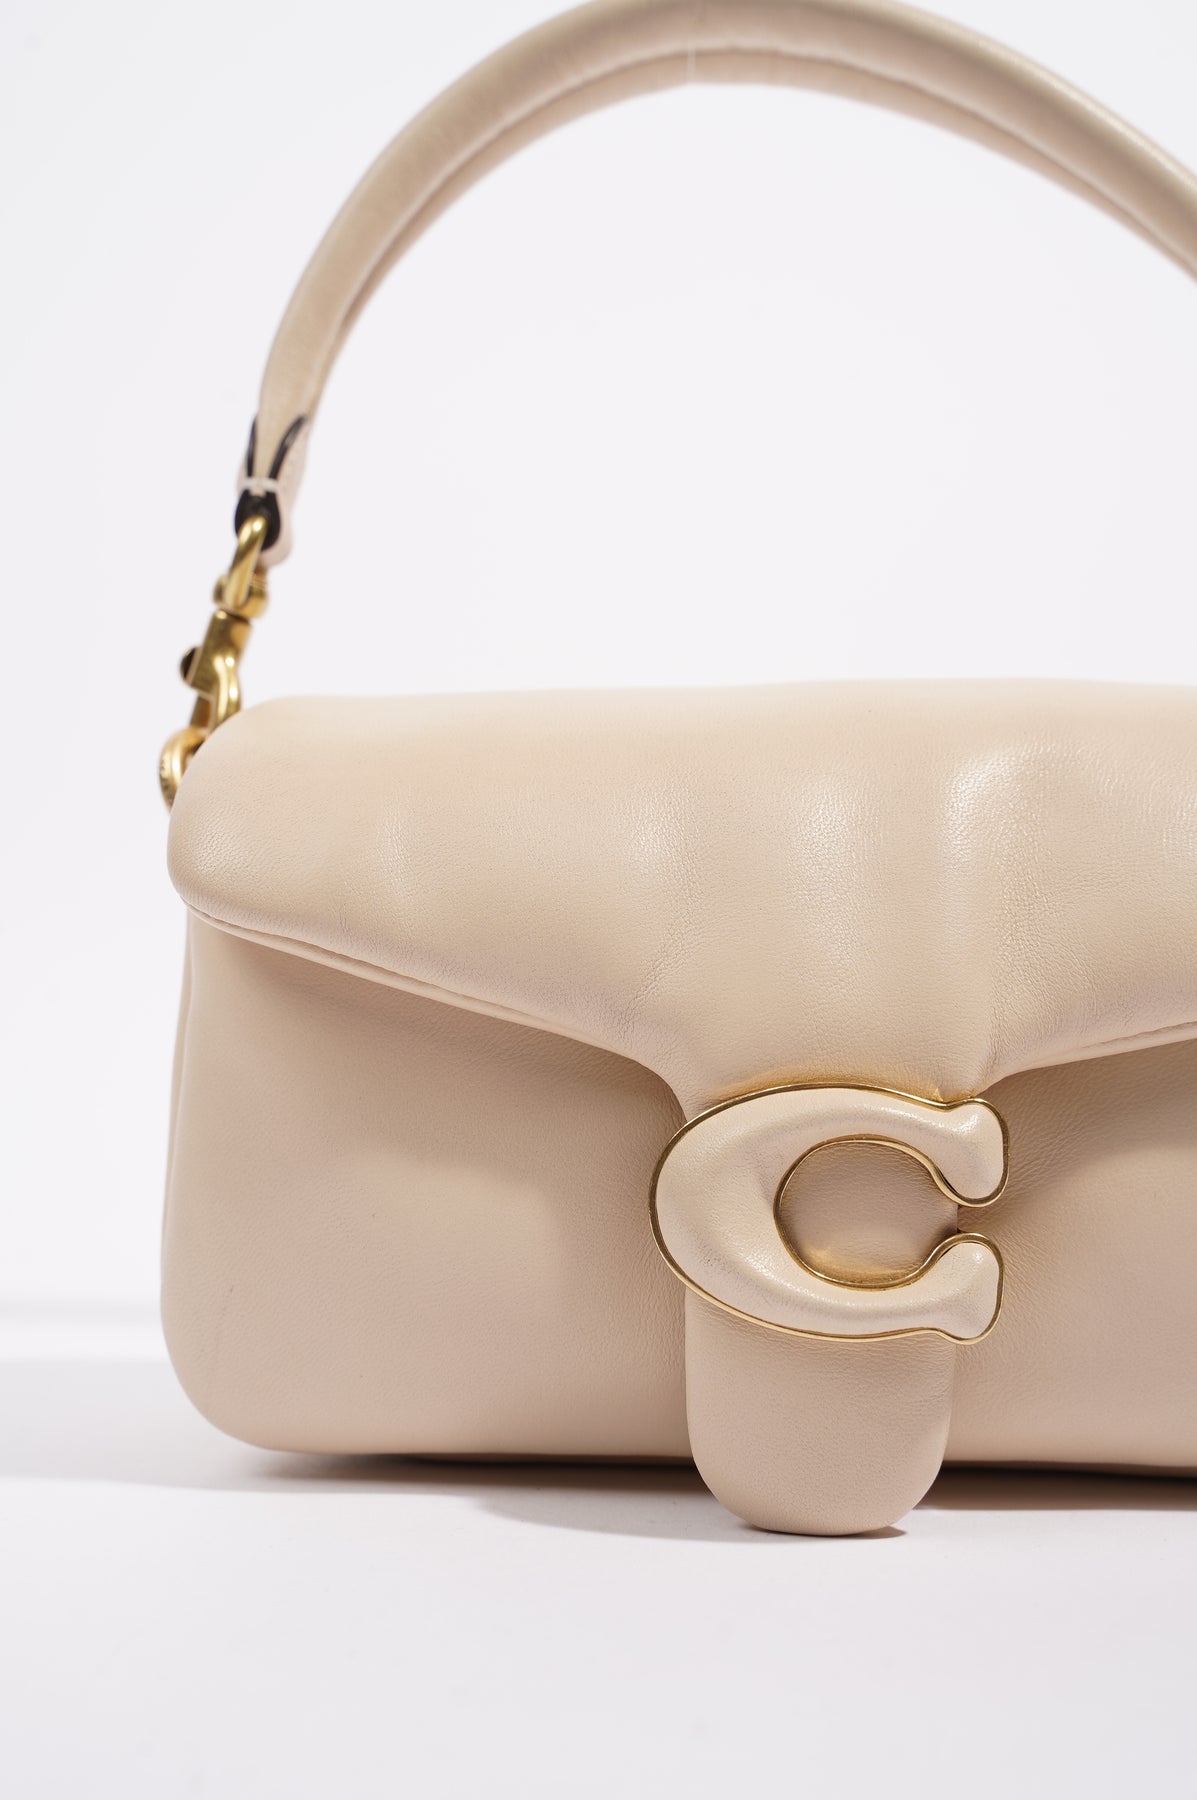 Coach Pillow Tabby 18 Leather Cross-body Bag - Ivory